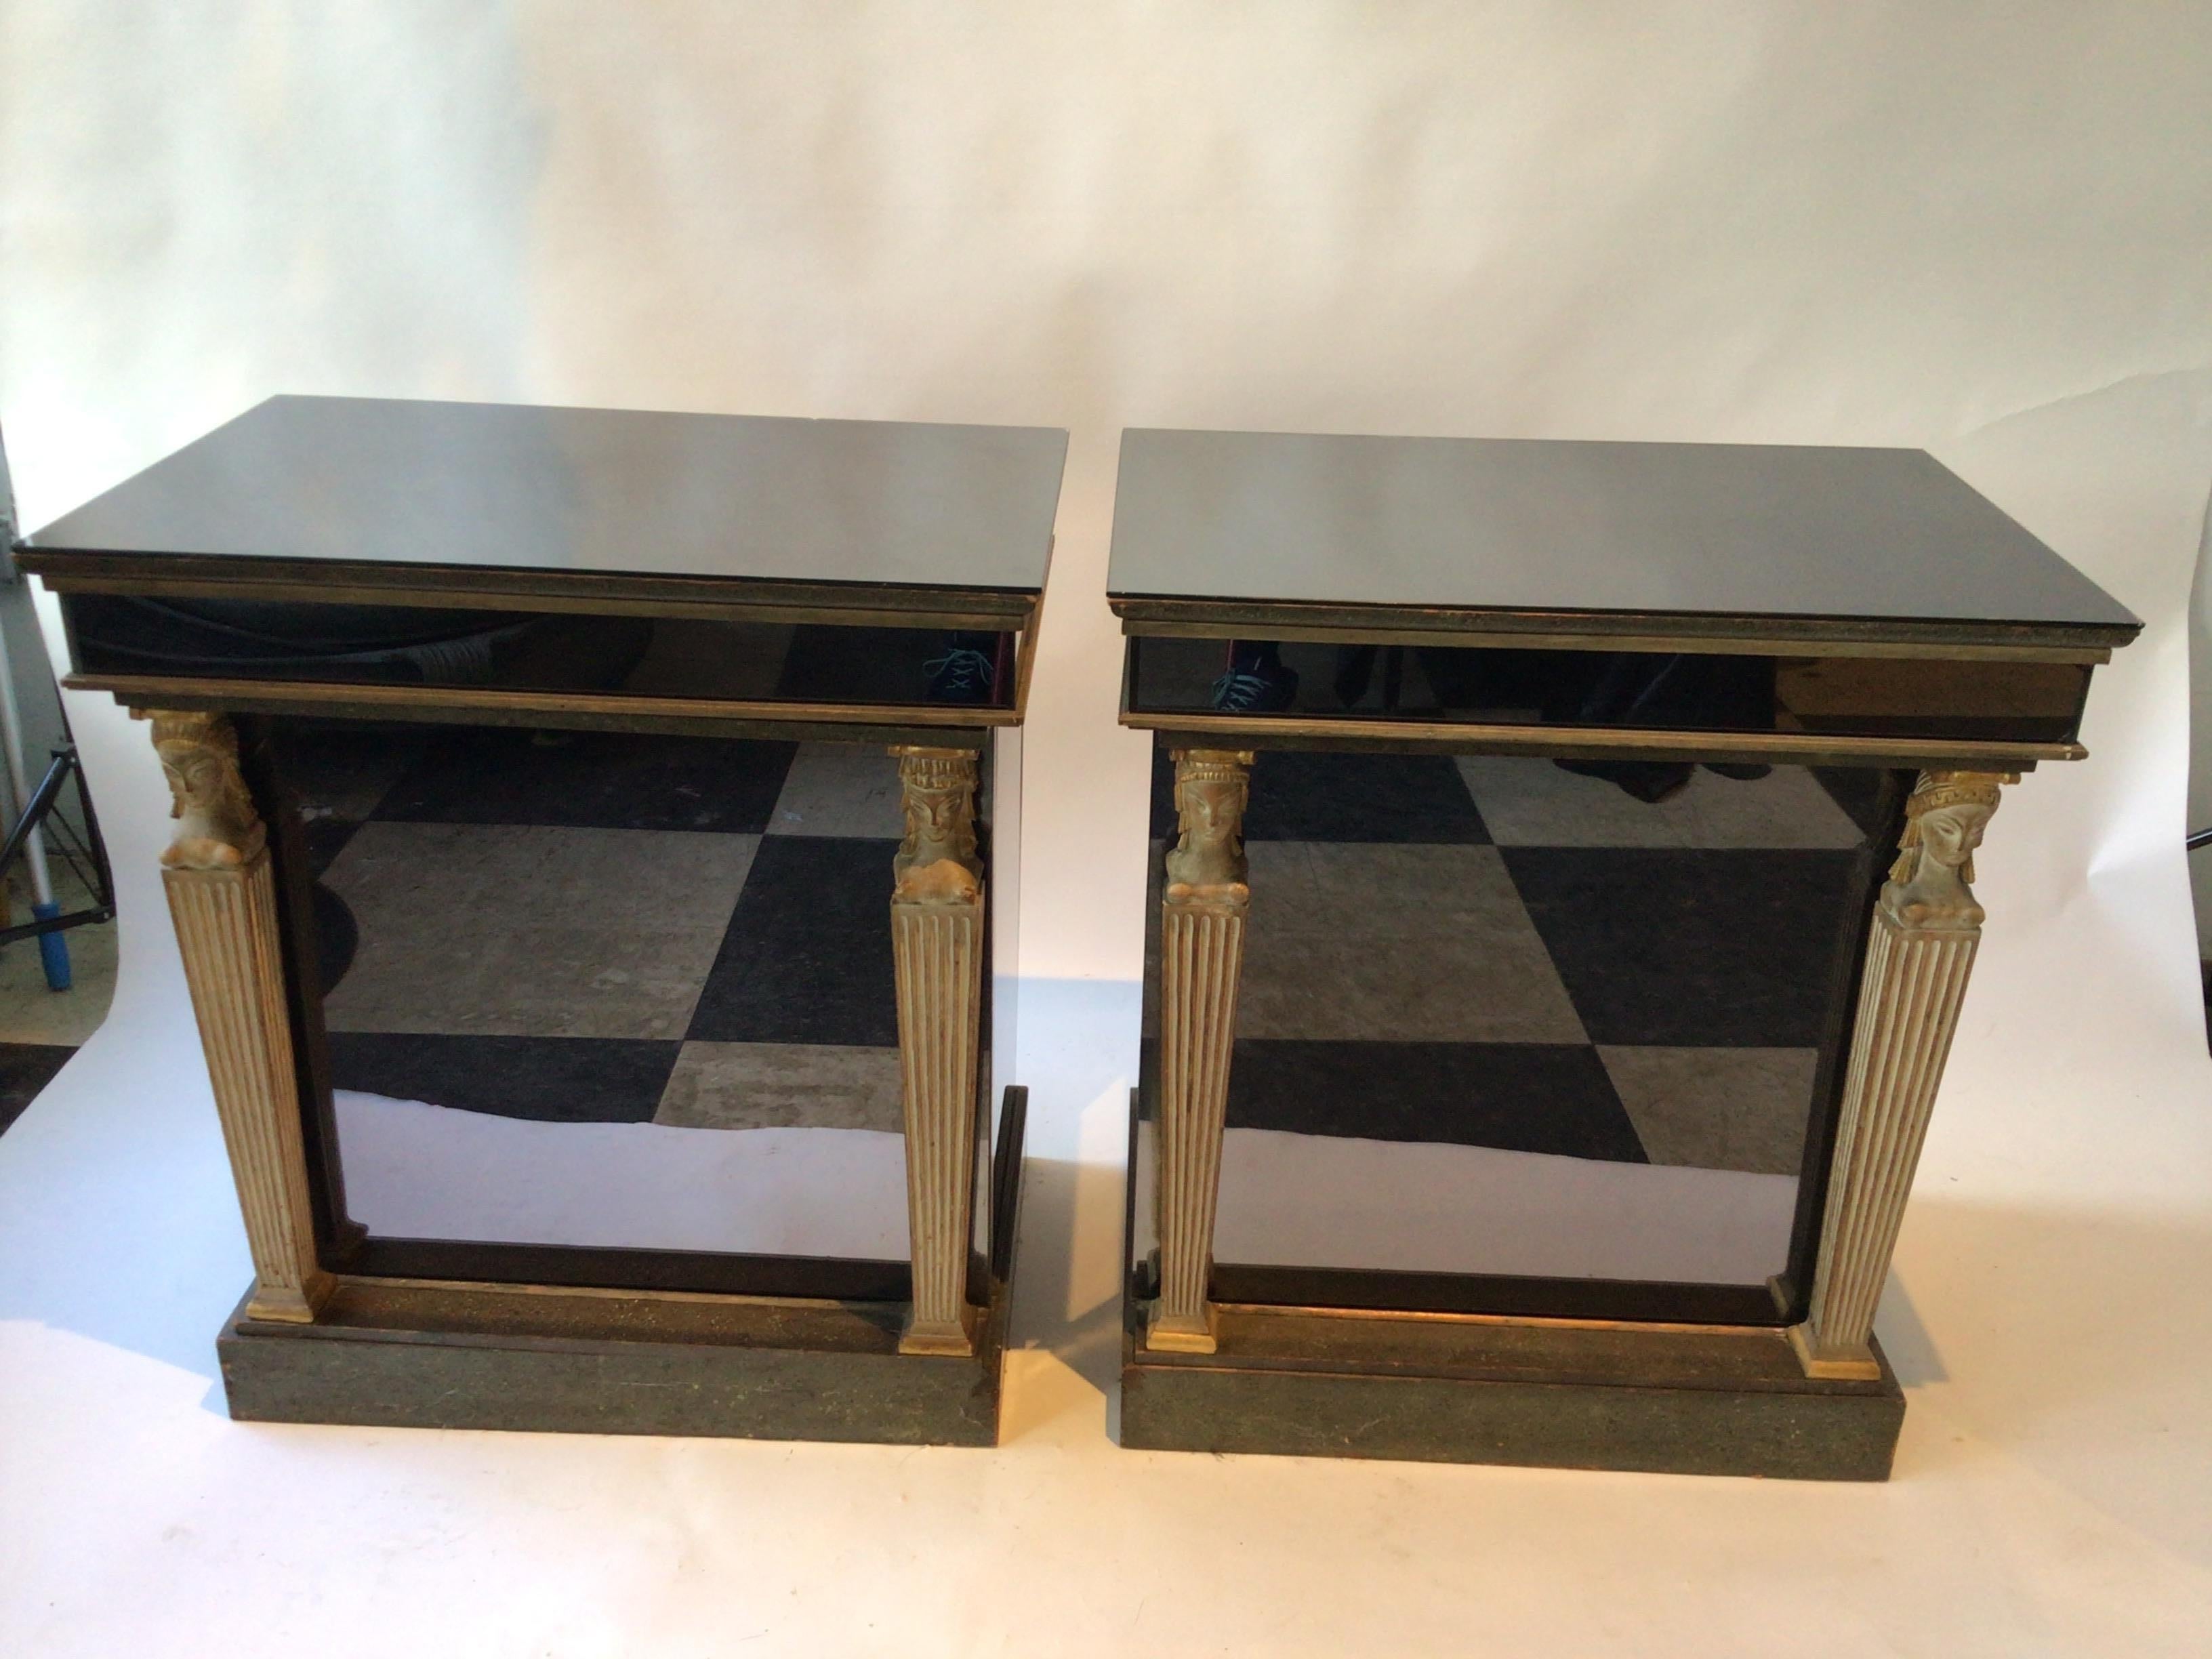 Pair of 1940s smokey mirrored cabinets with carved wood classical figures. One chip on top of glass as shown in last picture.